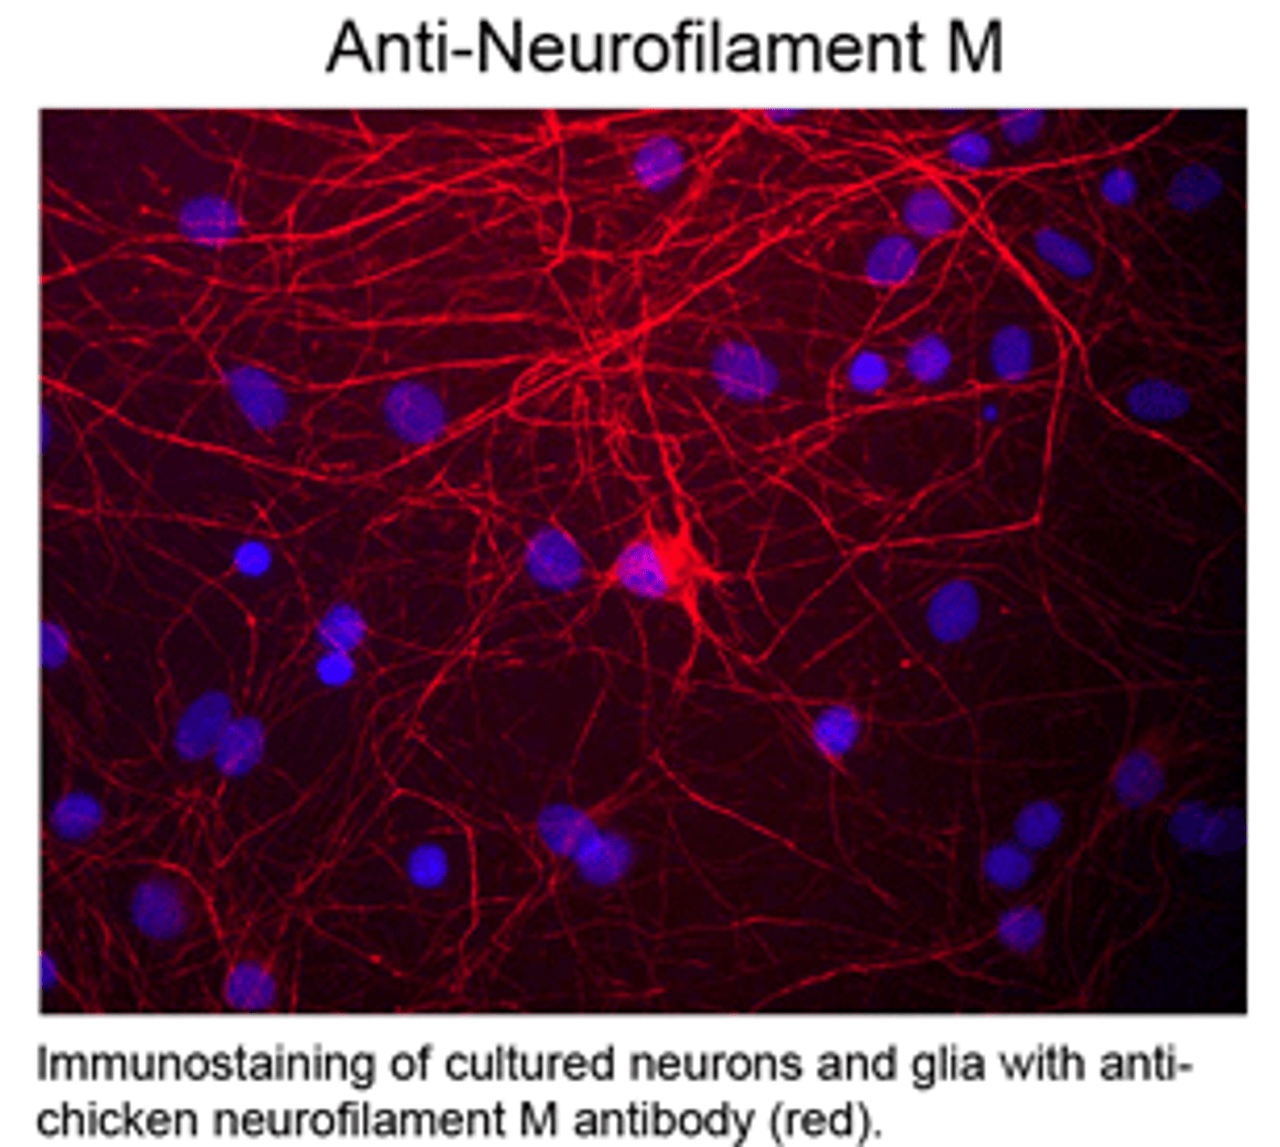 Immunostaining of cultured neurons and glia with anti-chicken neurofilament M antibody (red) .